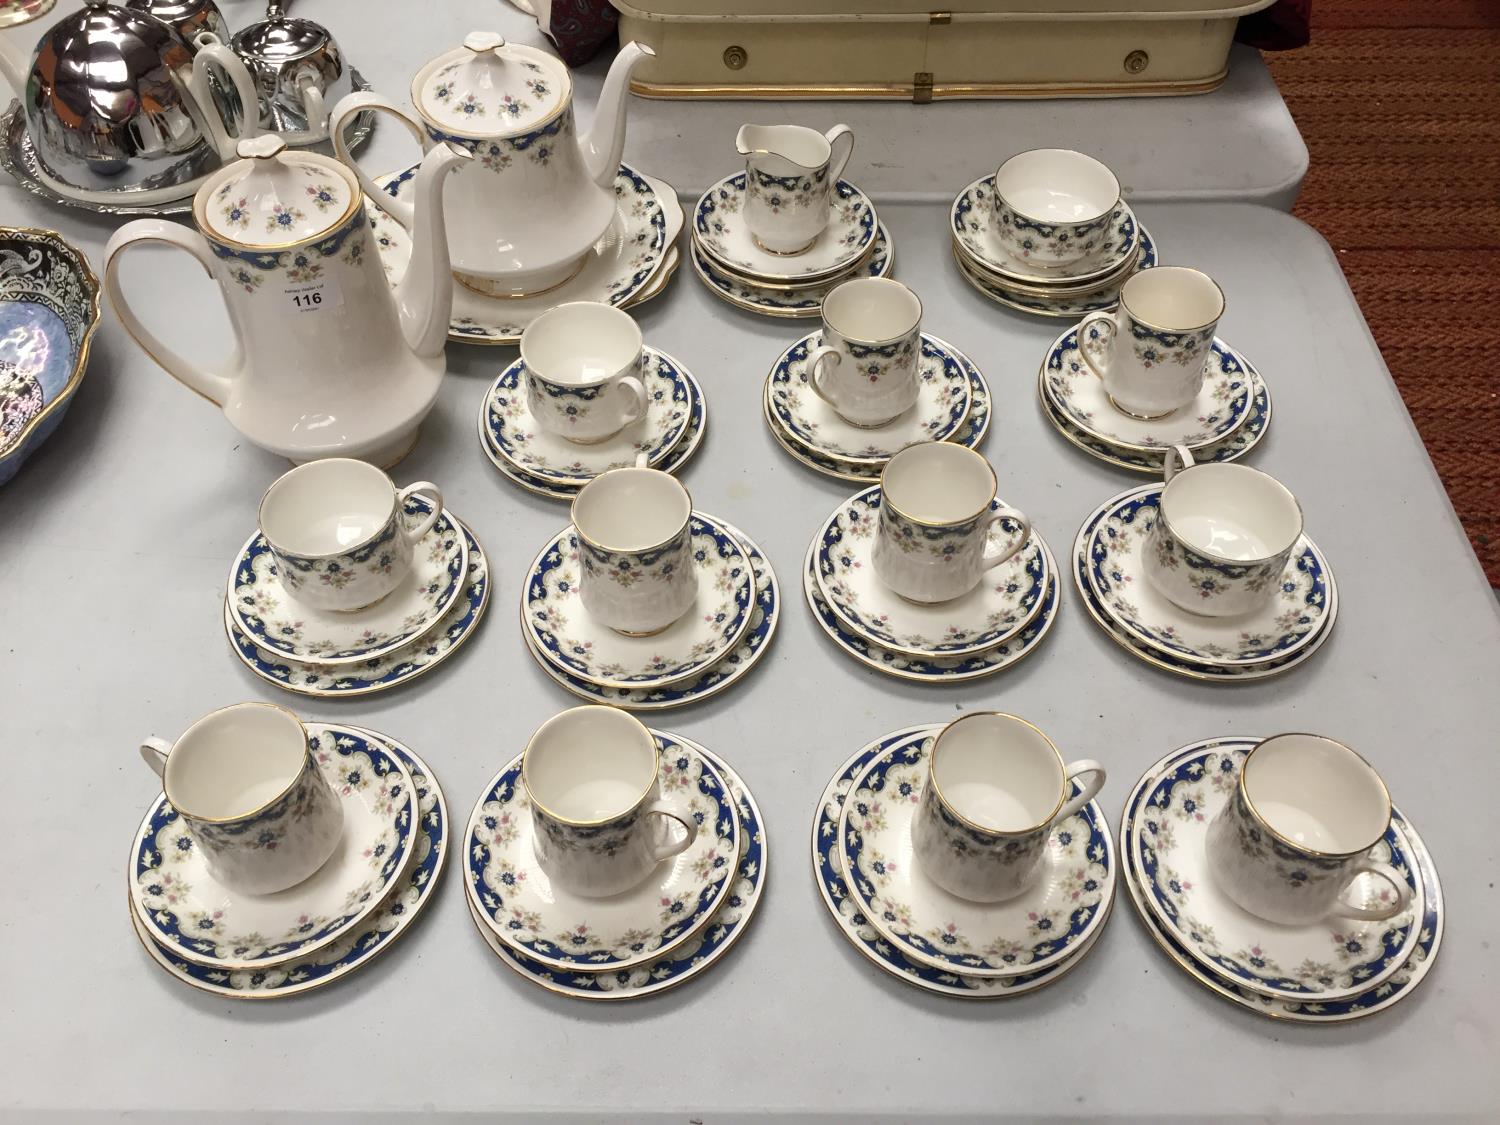 A 'PARAGON' TEA SET. TO INCLUDE CUPS, SAUCERS, TEAPOT AND COFFEE POT